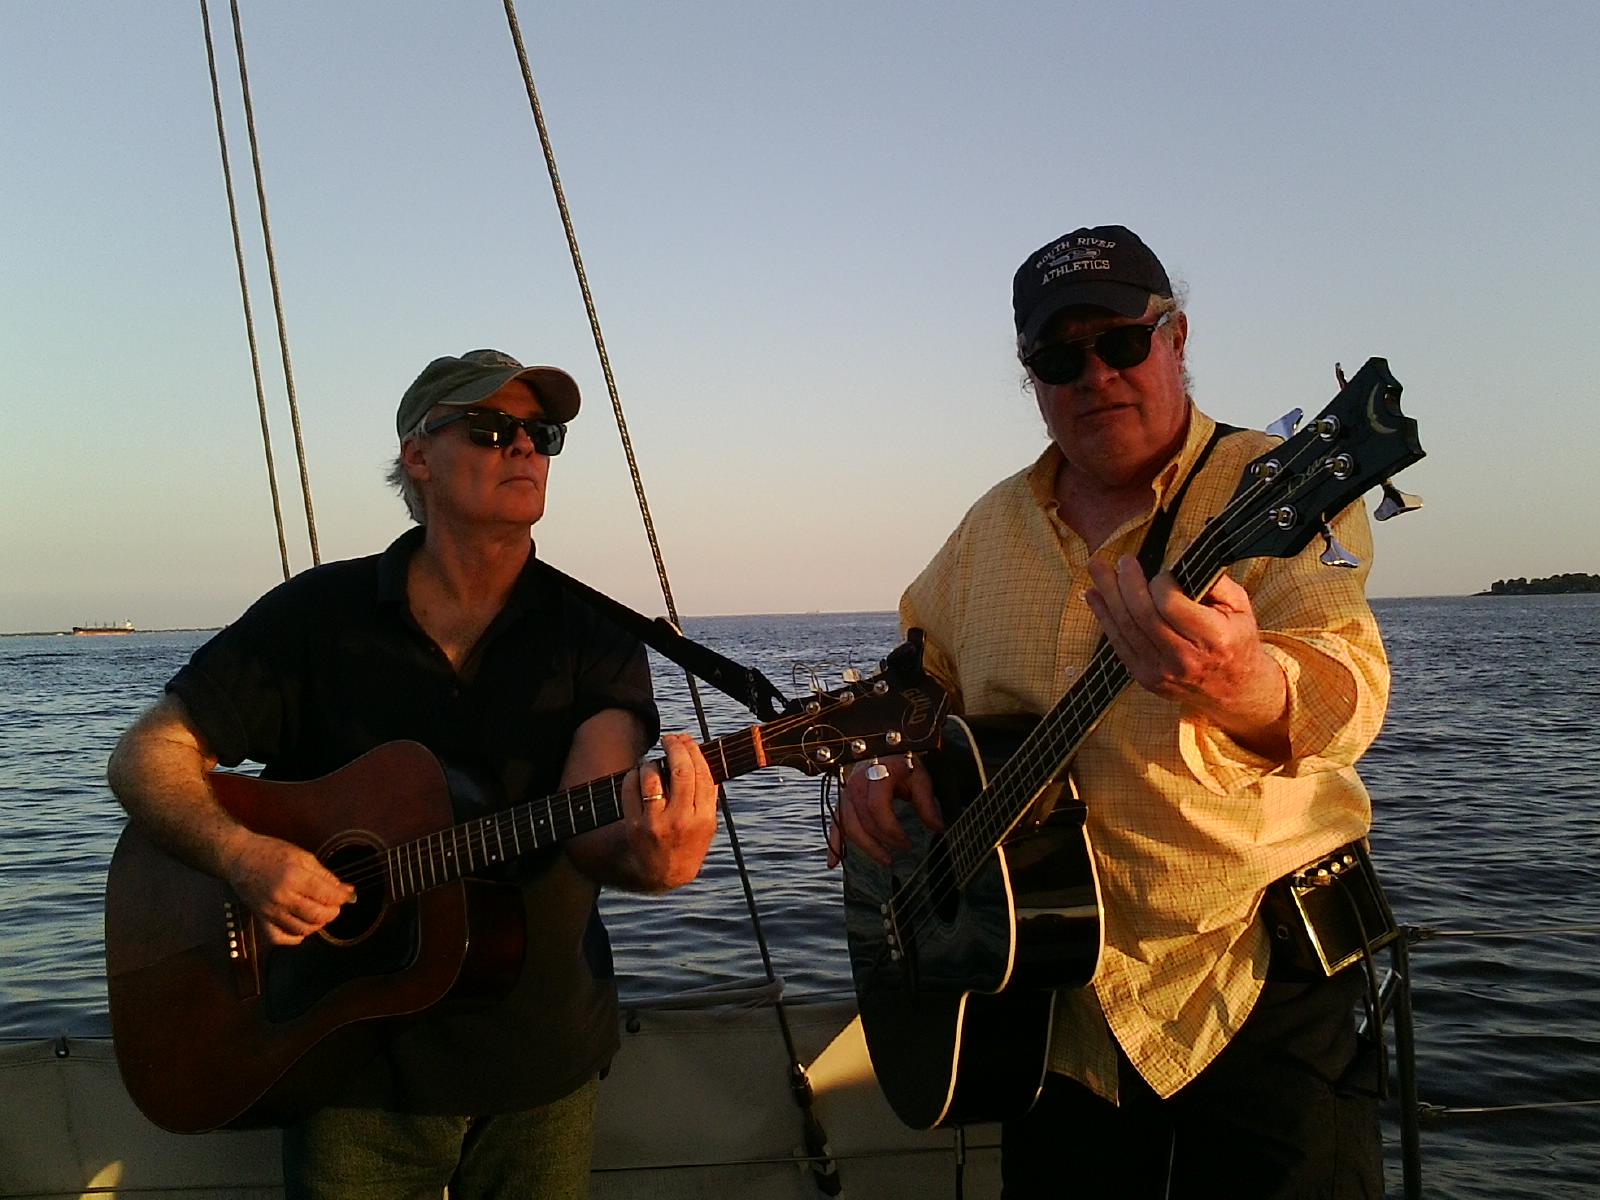 Sunset Sail with Don Shappelle and Don Sennett